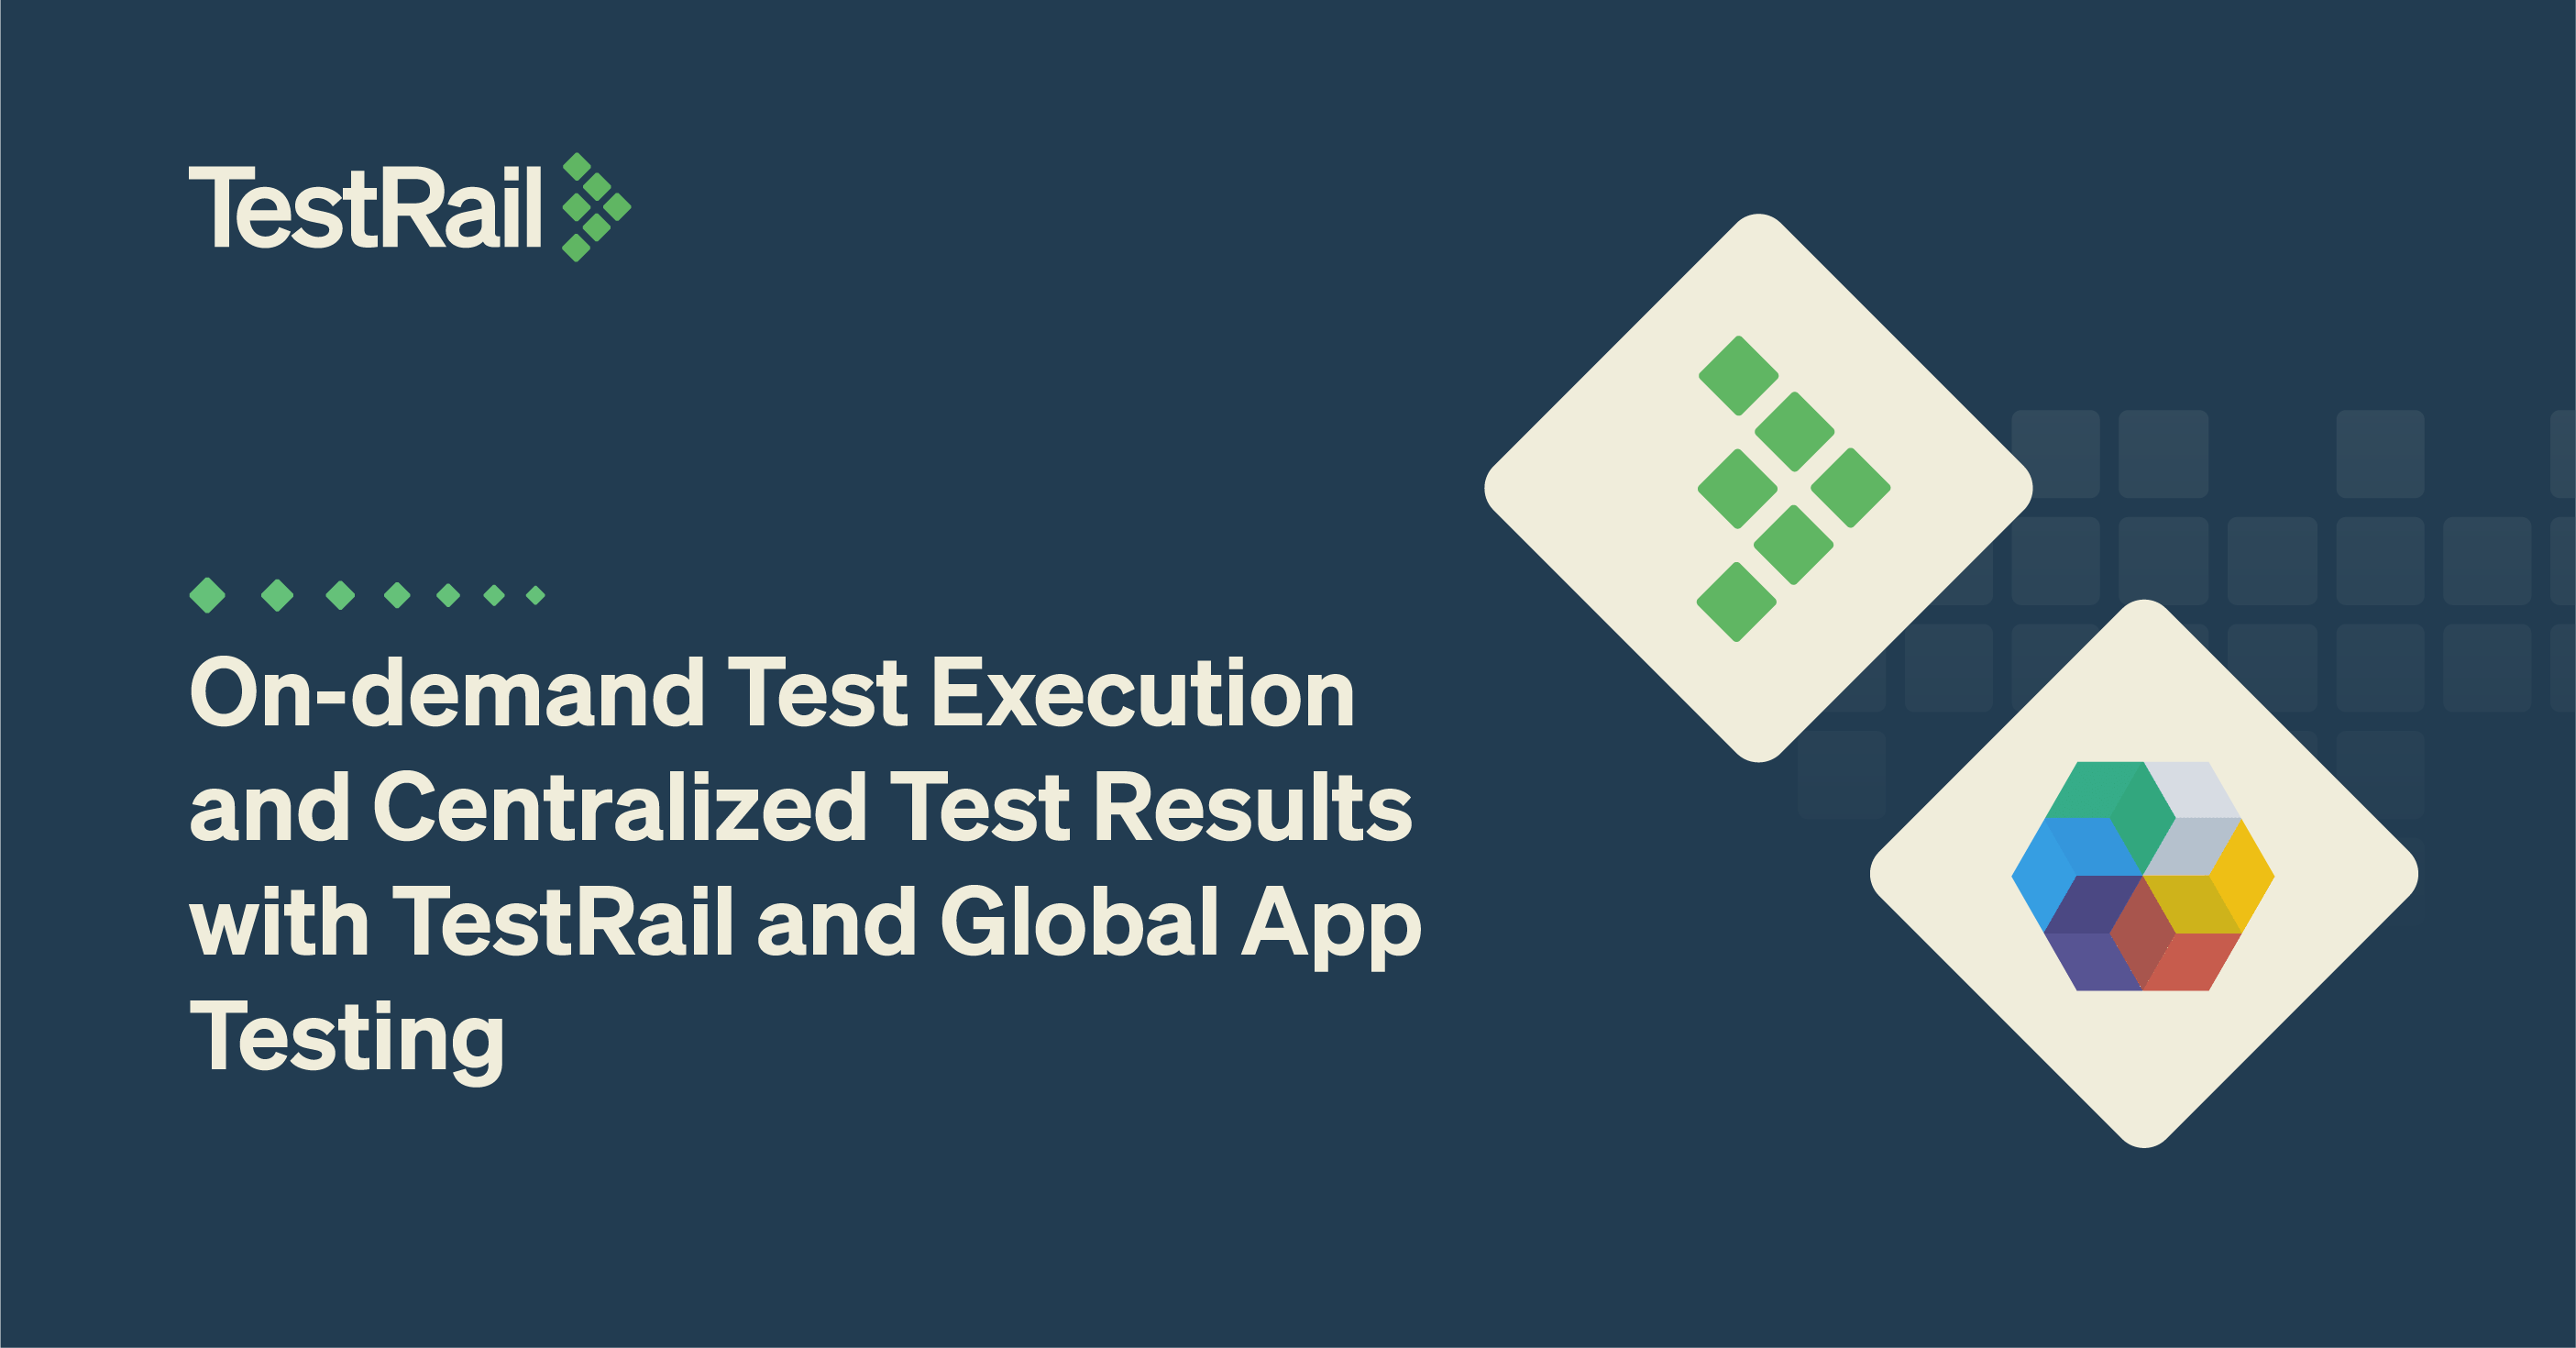 On-demand Test Execution and Centralized Test Results with TestRail and Global App Testing